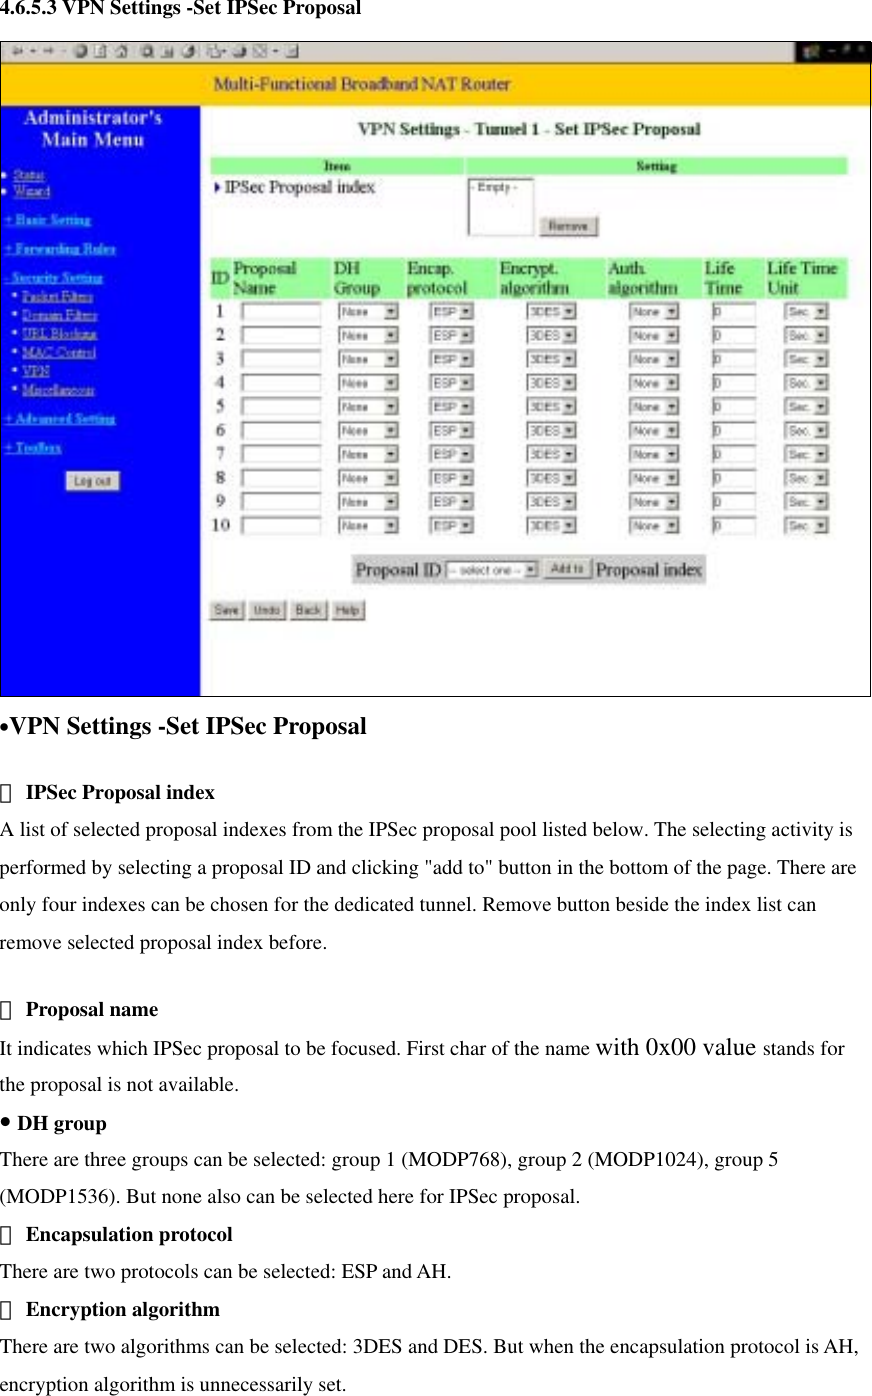  4.6.5.3 VPN Settings -Set IPSec Proposal  •VPN Settings -Set IPSec Proposal  　IPSec Proposal index A list of selected proposal indexes from the IPSec proposal pool listed below. The selecting activity is performed by selecting a proposal ID and clicking &quot;add to&quot; button in the bottom of the page. There are only four indexes can be chosen for the dedicated tunnel. Remove button beside the index list can remove selected proposal index before.    　Proposal name It indicates which IPSec proposal to be focused. First char of the name with 0x00 value stands for the proposal is not available.   • DH group There are three groups can be selected: group 1 (MODP768), group 2 (MODP1024), group 5 (MODP1536). But none also can be selected here for IPSec proposal.    　Encapsulation protocol There are two protocols can be selected: ESP and AH.    　Encryption algorithm There are two algorithms can be selected: 3DES and DES. But when the encapsulation protocol is AH, encryption algorithm is unnecessarily set.   